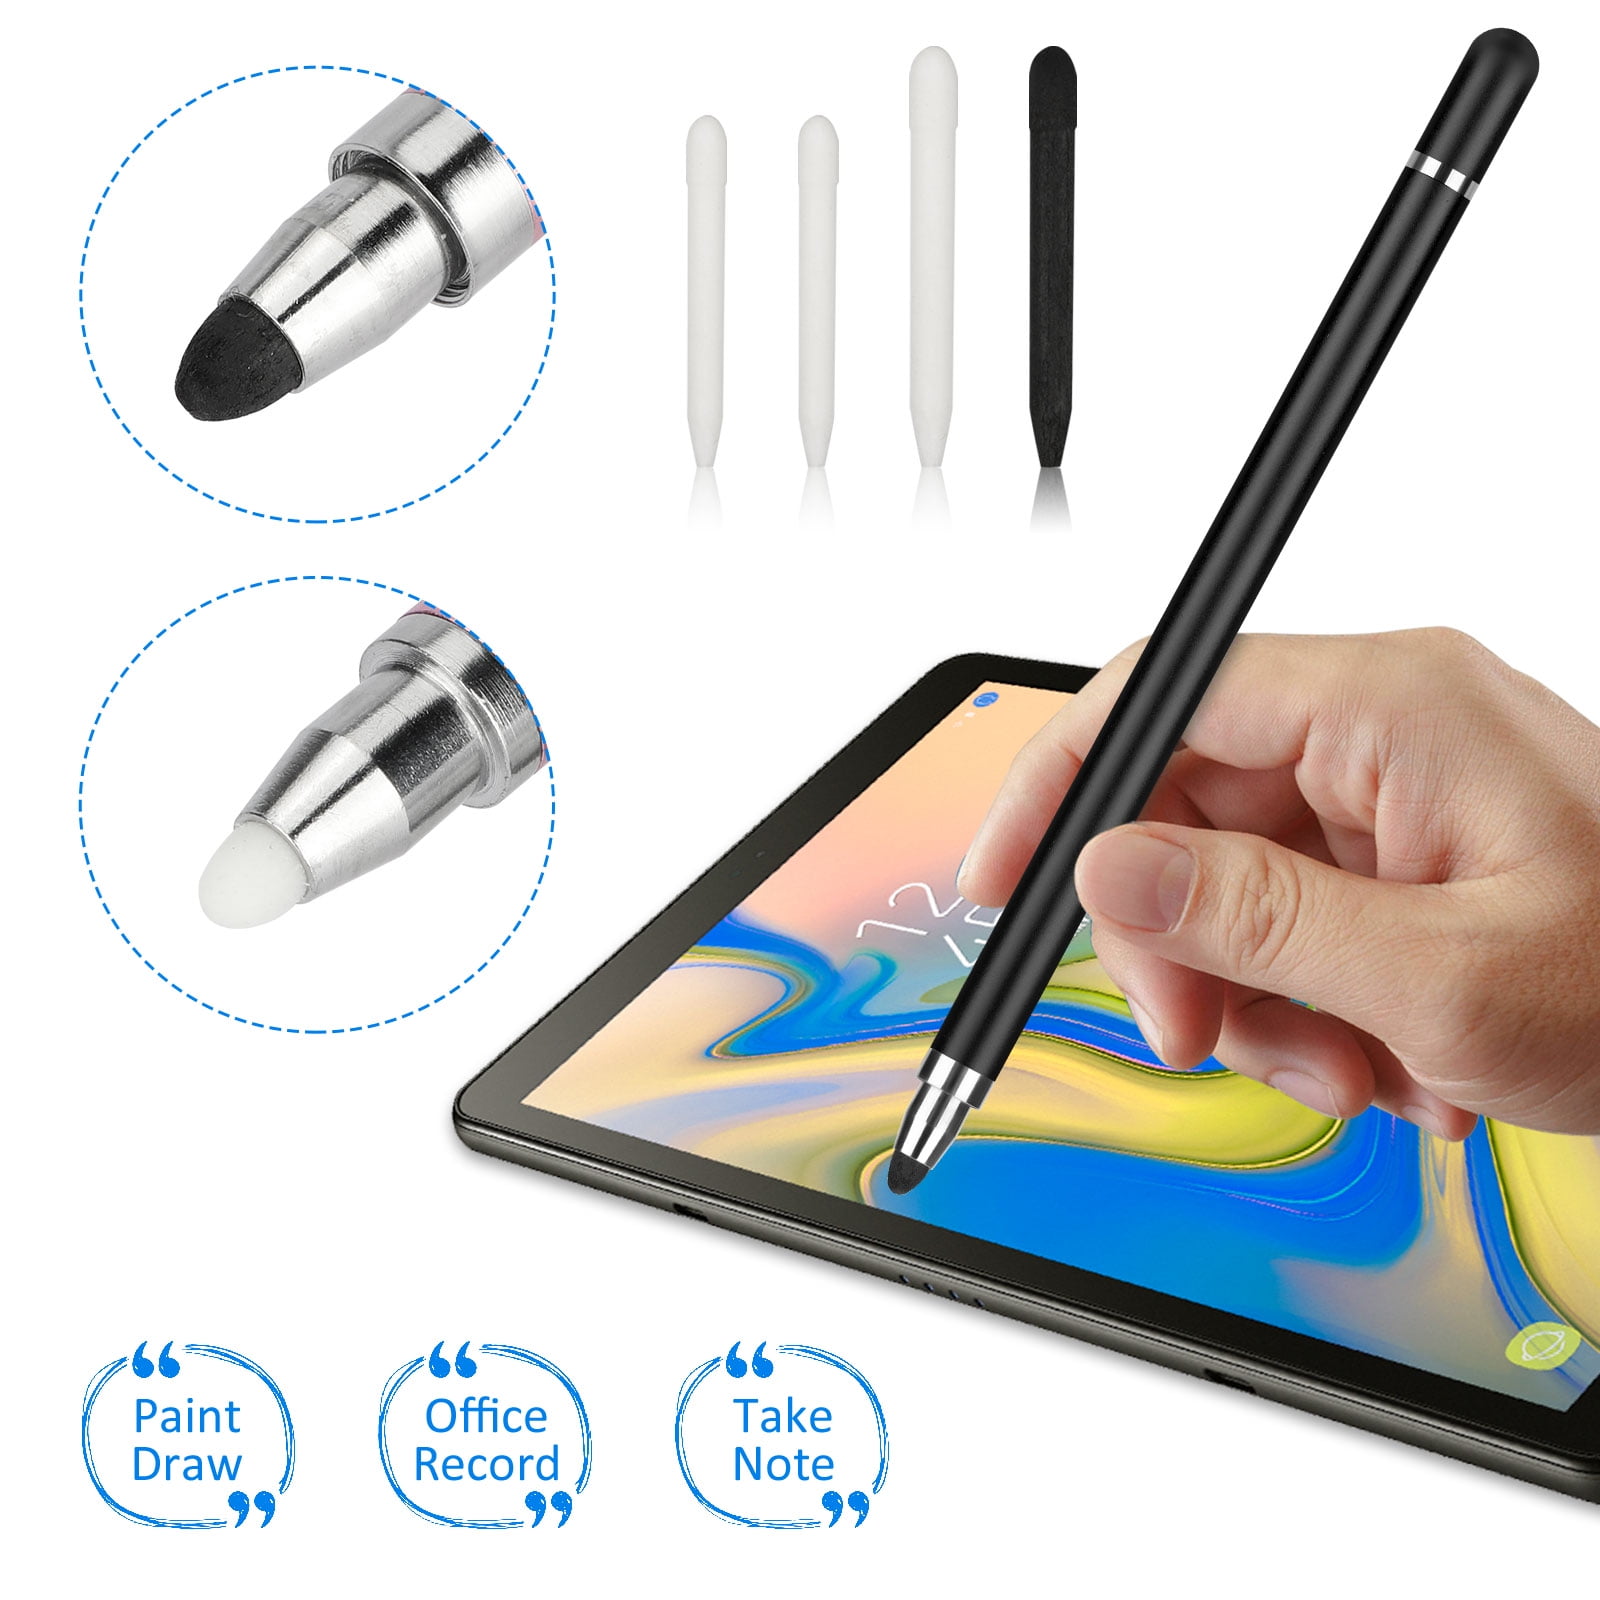 Touch Screen Pen Stylus Pencil High Precision For Ipad Iphone Samsung Tablet PC 